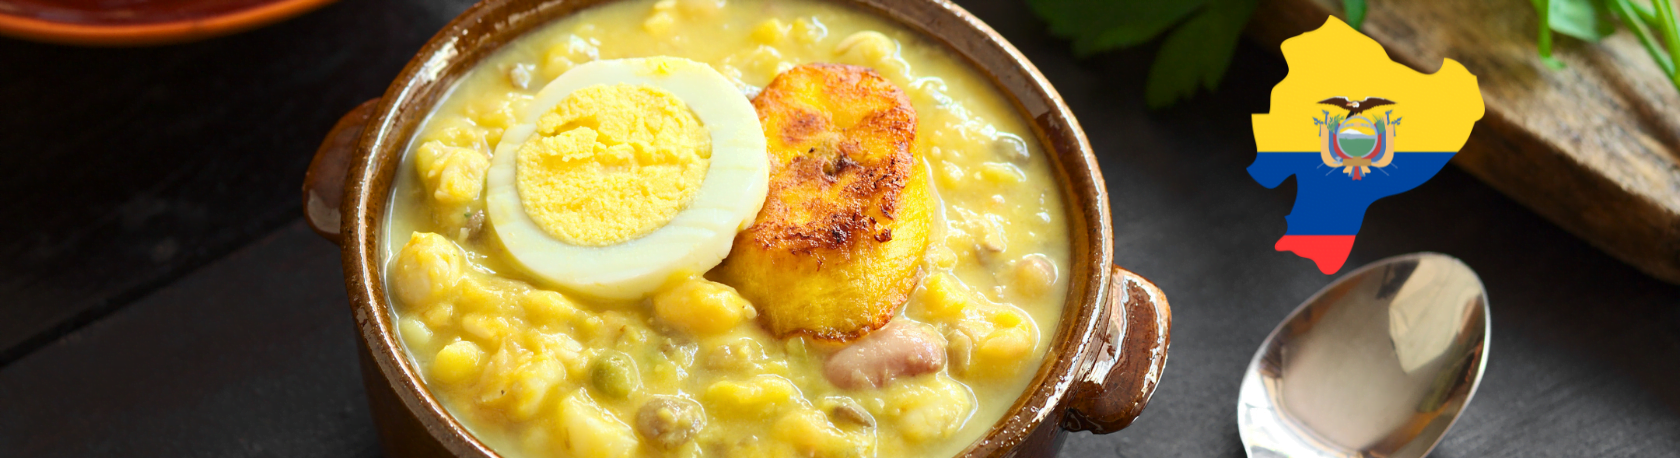 Did you know that 'fanesca', a popular Ecuadorean dish, is only eaten at Easter? - Easy Español